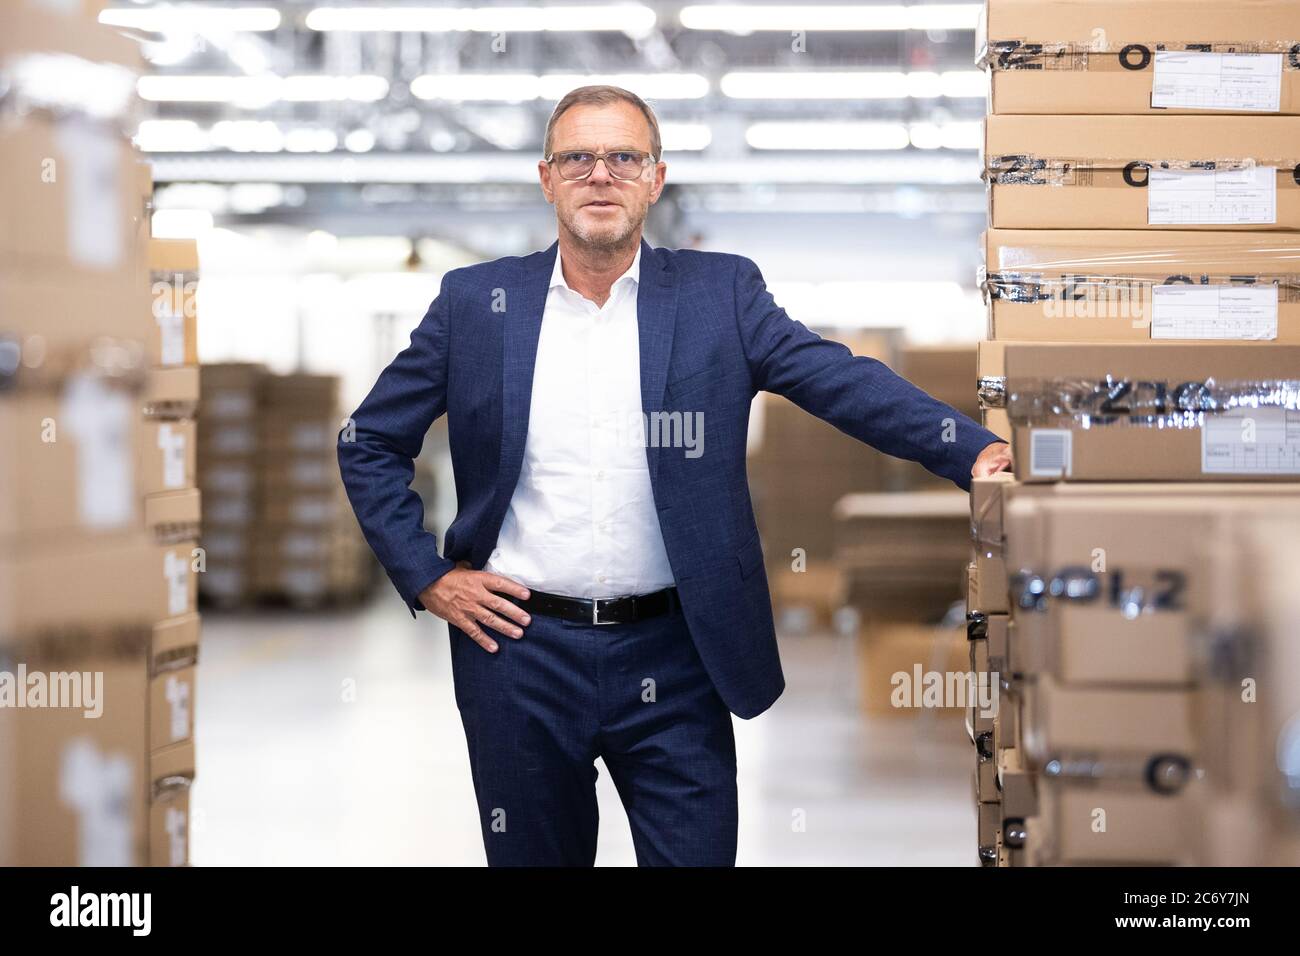 Bietigheim Bissingen, Germany. 09th July, 2020. Mark Bezner, managing  director of Olymp Bezner KG, stands next to cartons in the warehouse. The  suppliers, some of whom Olymp has been working with for